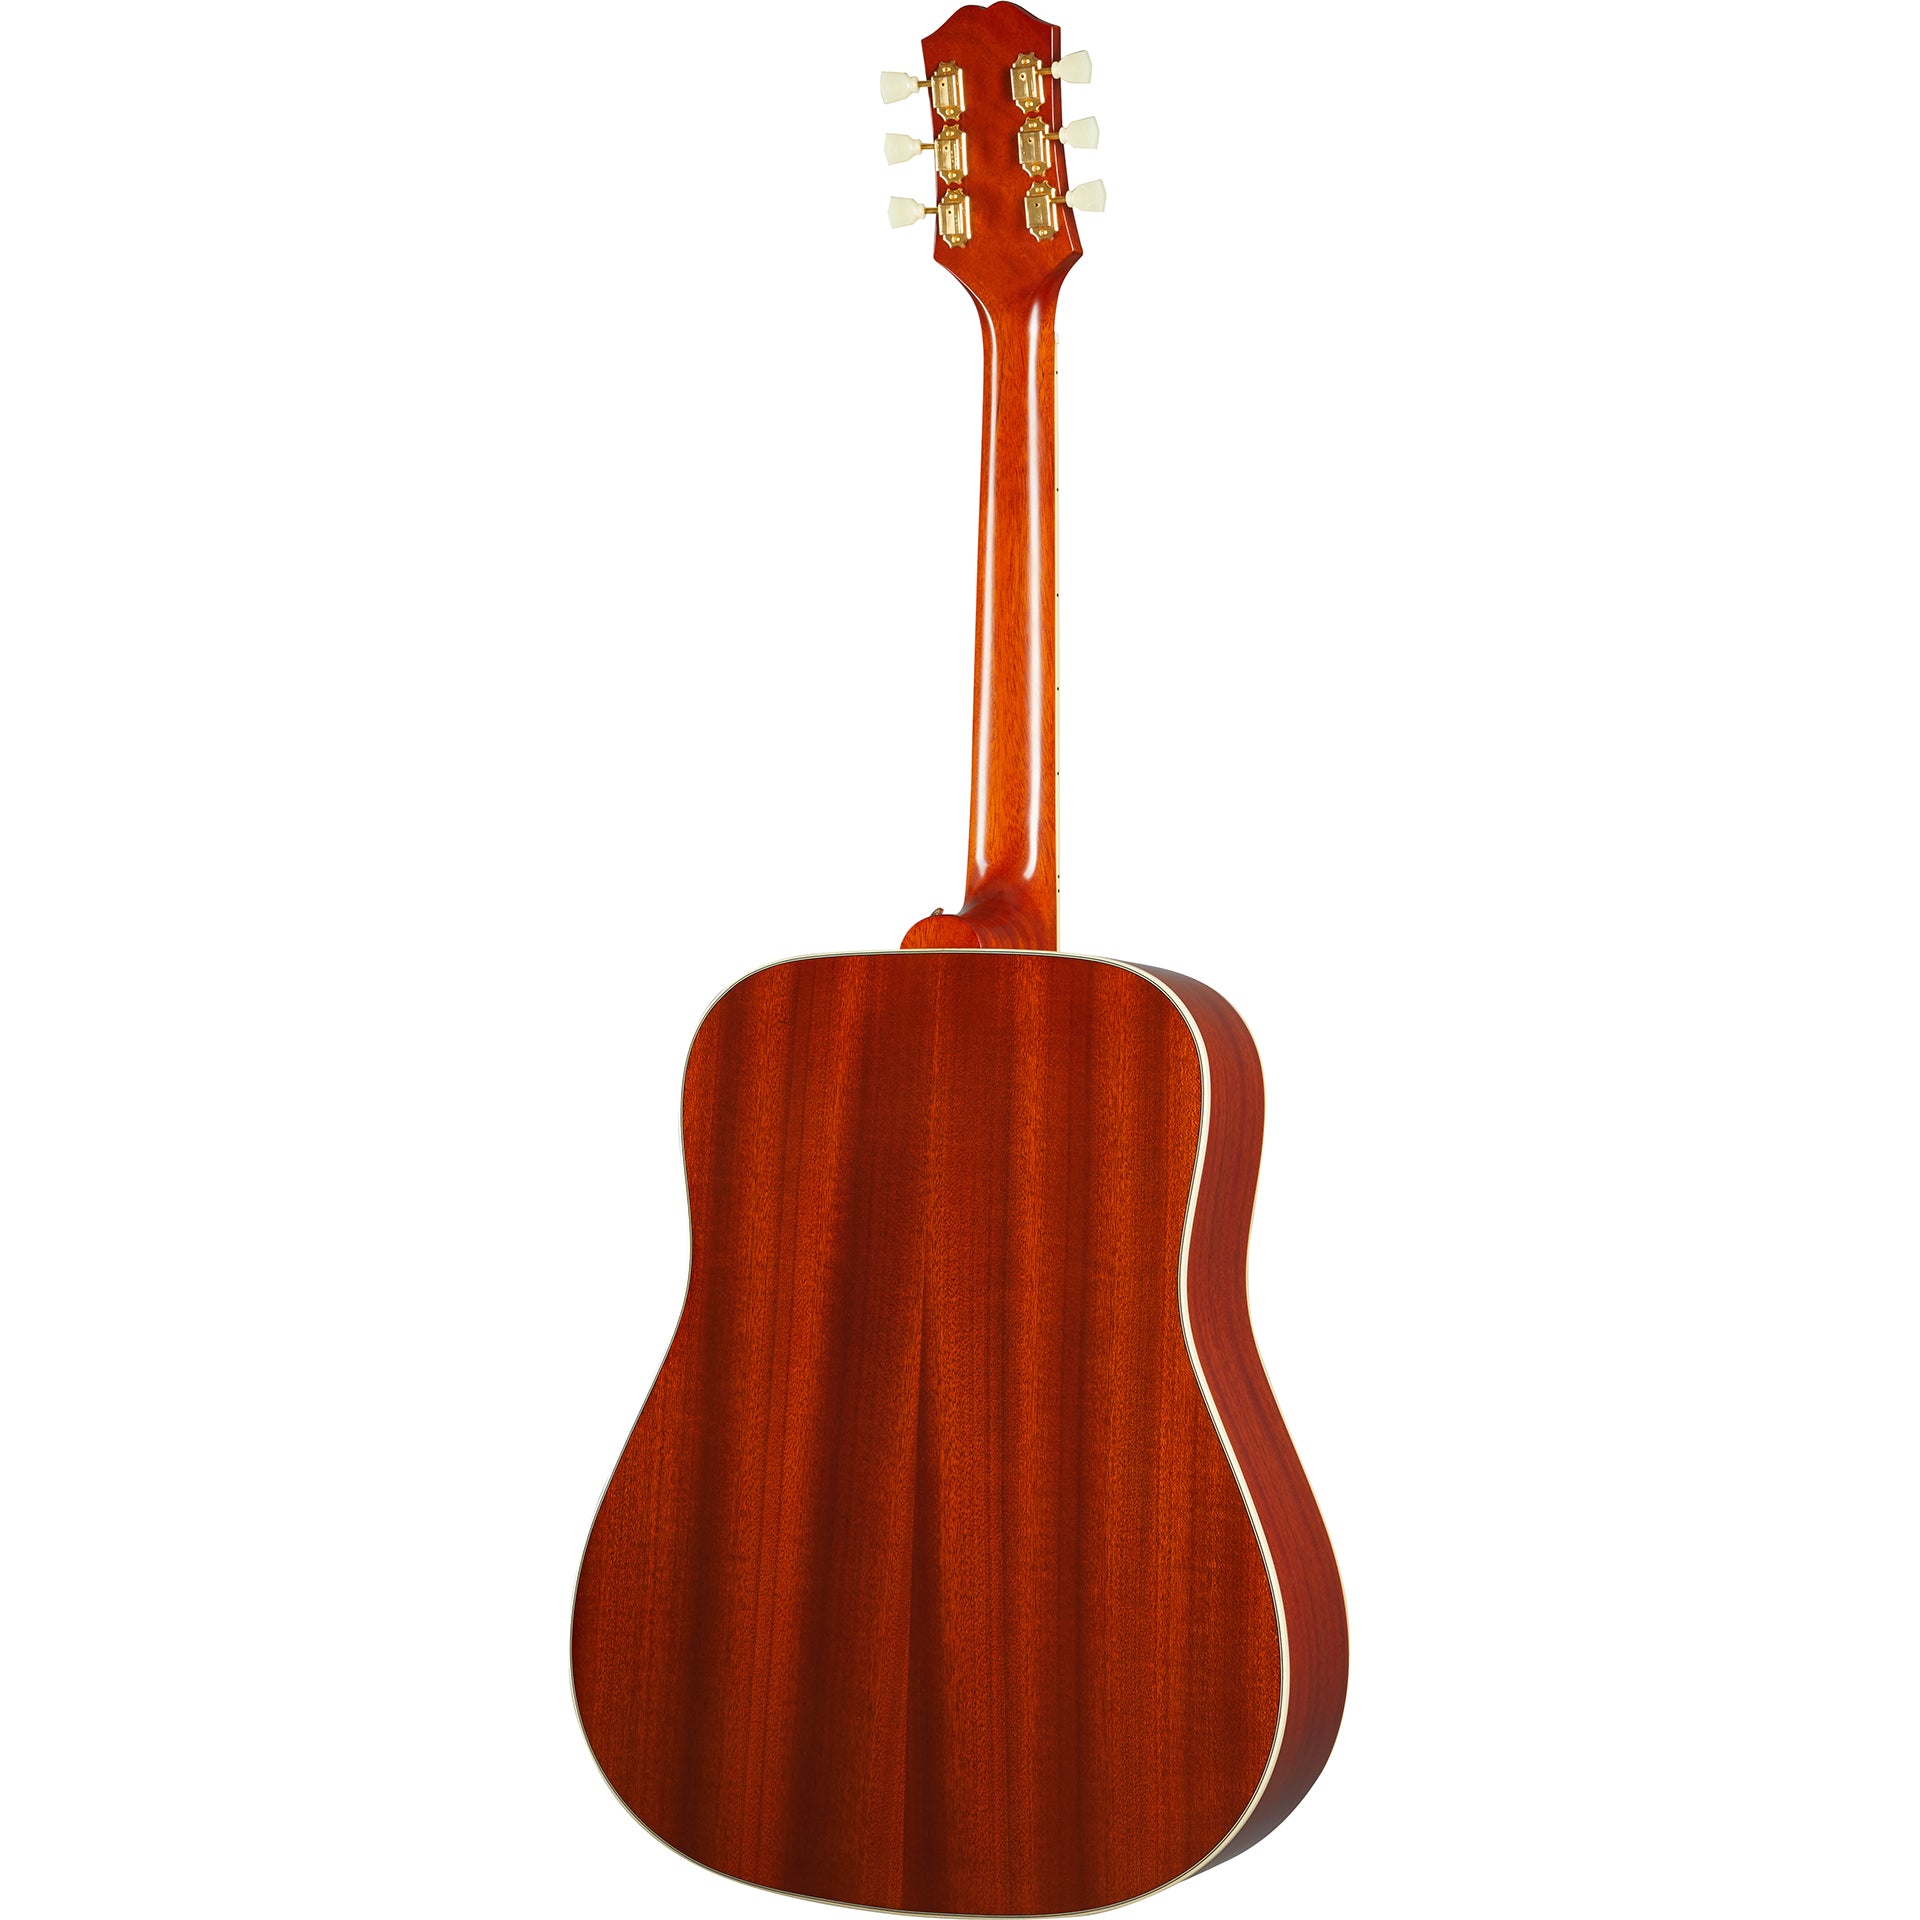 Epiphone Inspired By Gibson Hummingbird Acoustic Guitar, Aged 